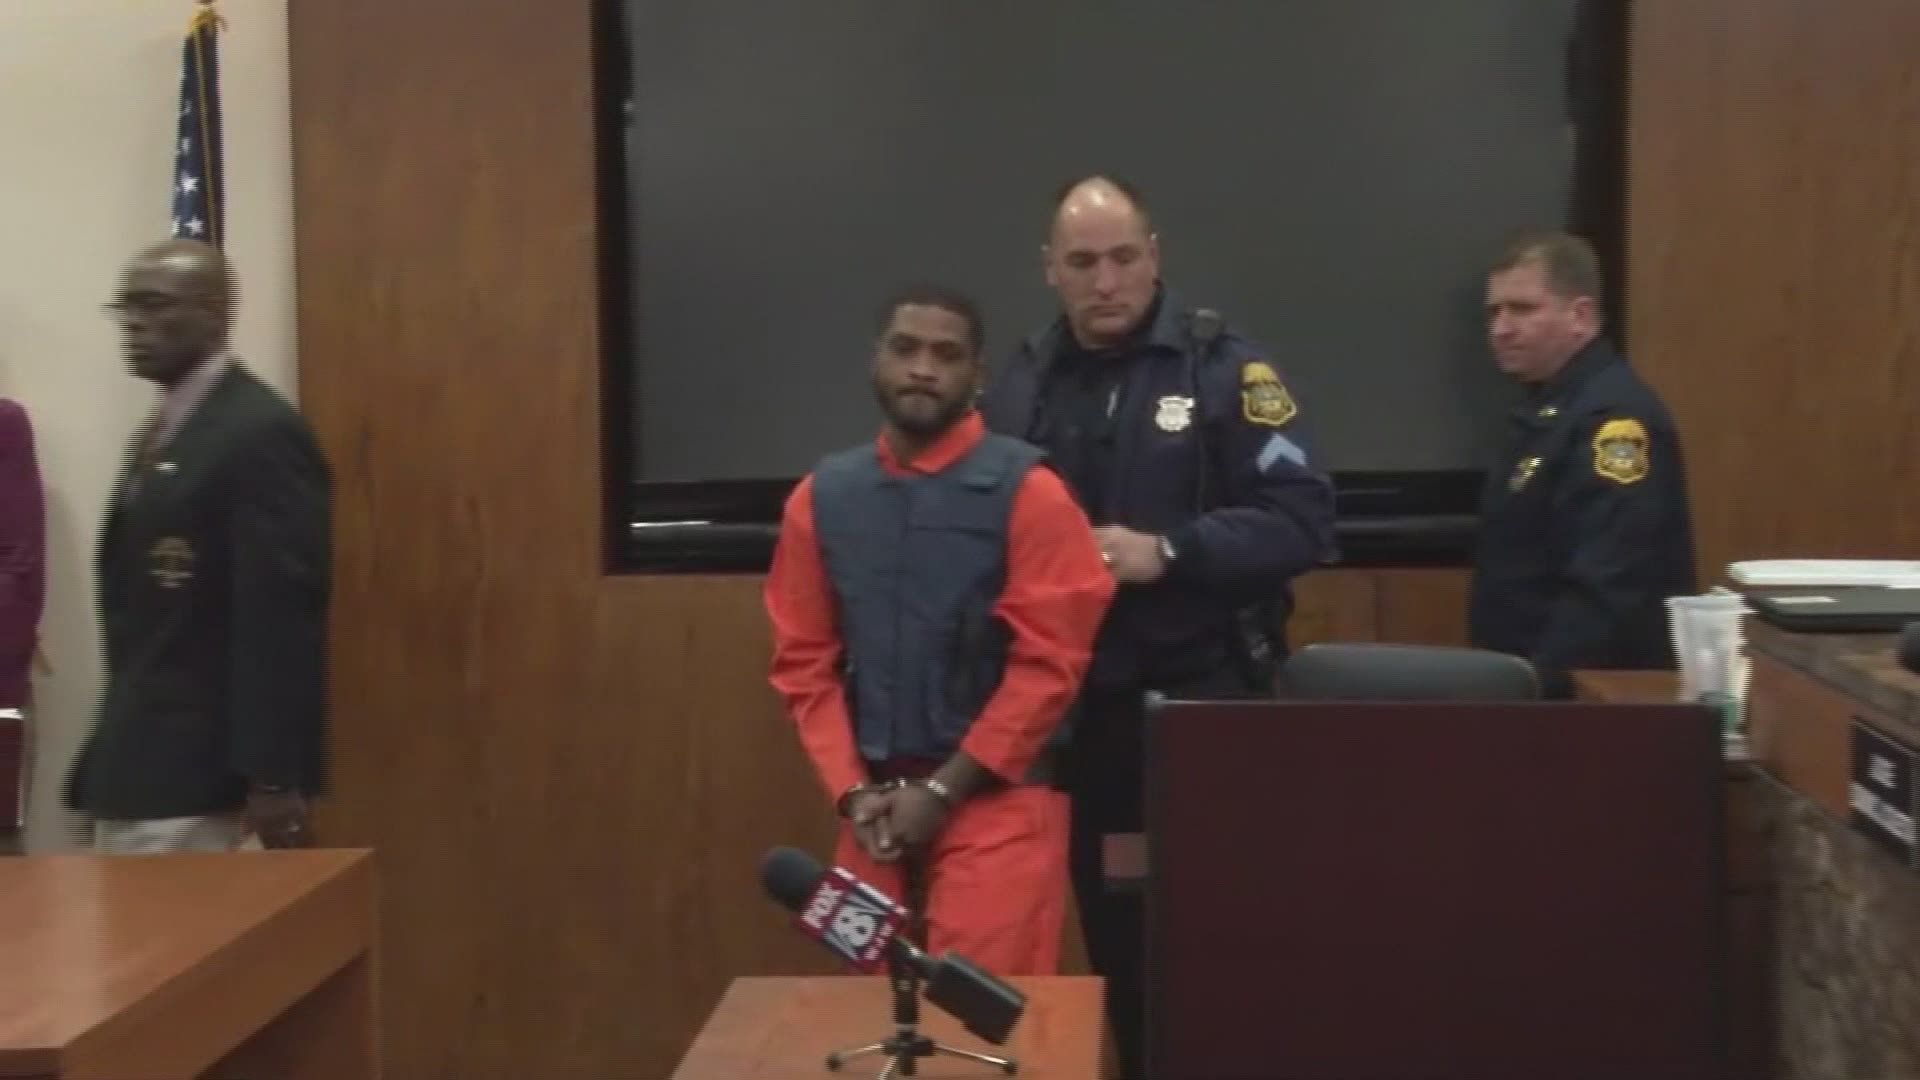 Dominique Swopes is facing two counts of aggravated murder and one count of aggravated arson.